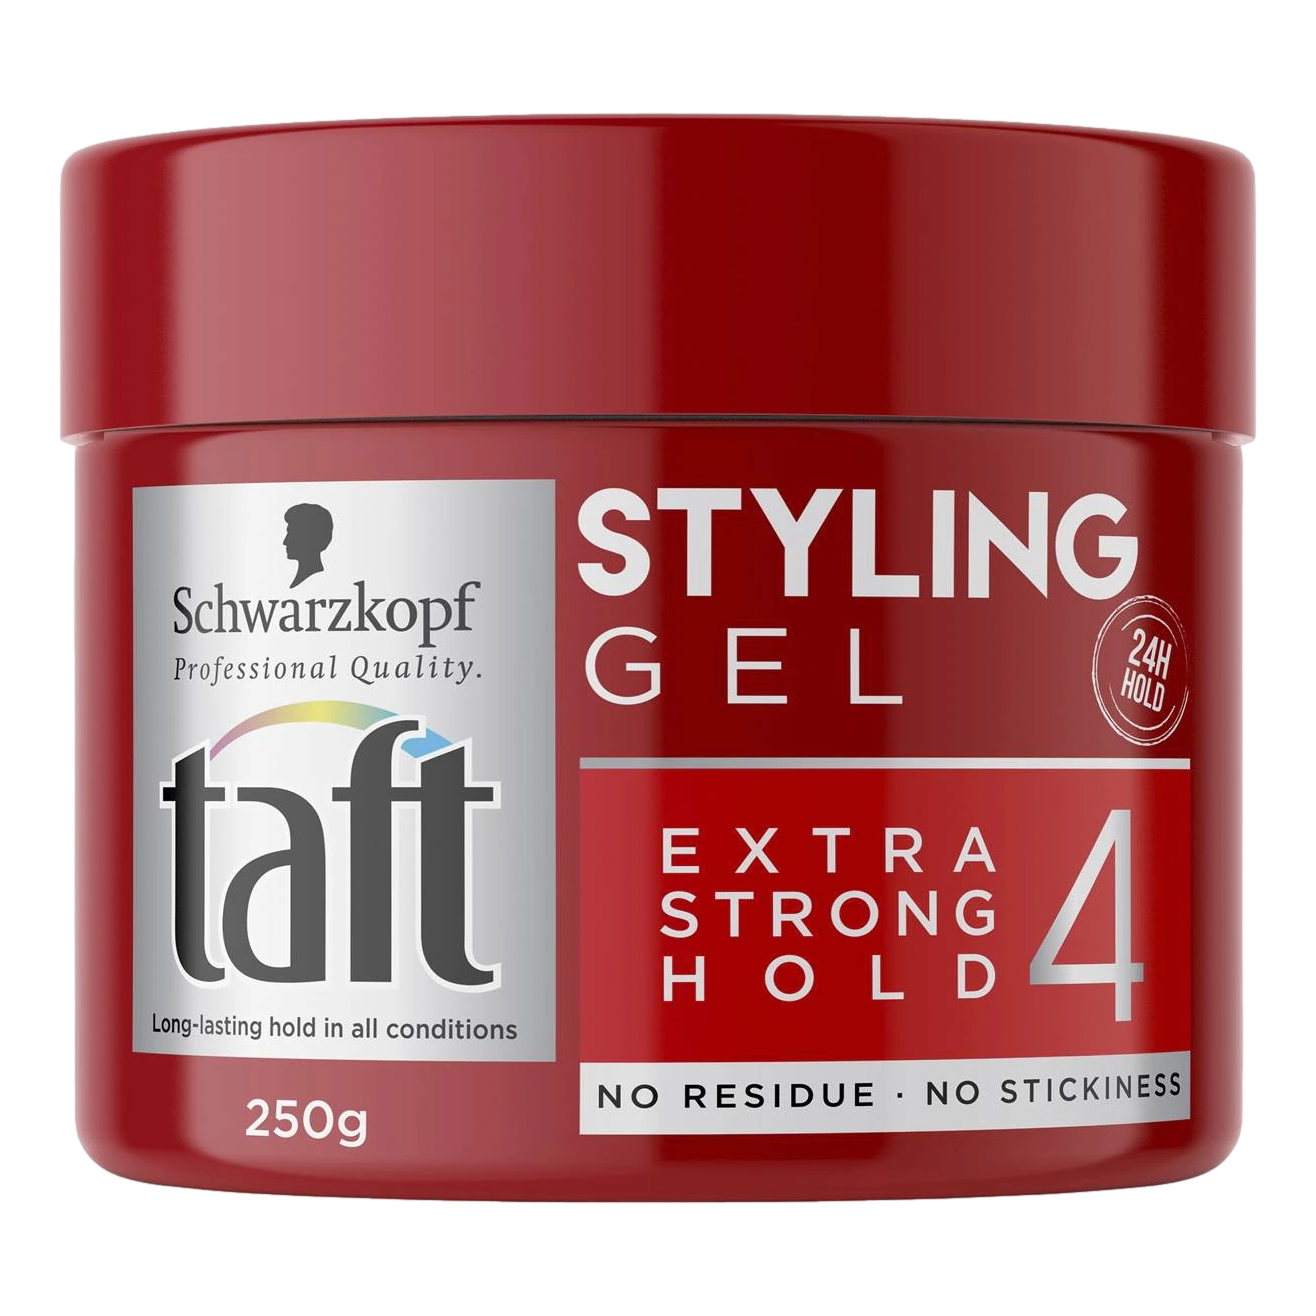 Taft Styling Gel Extra Strong Hold 250g